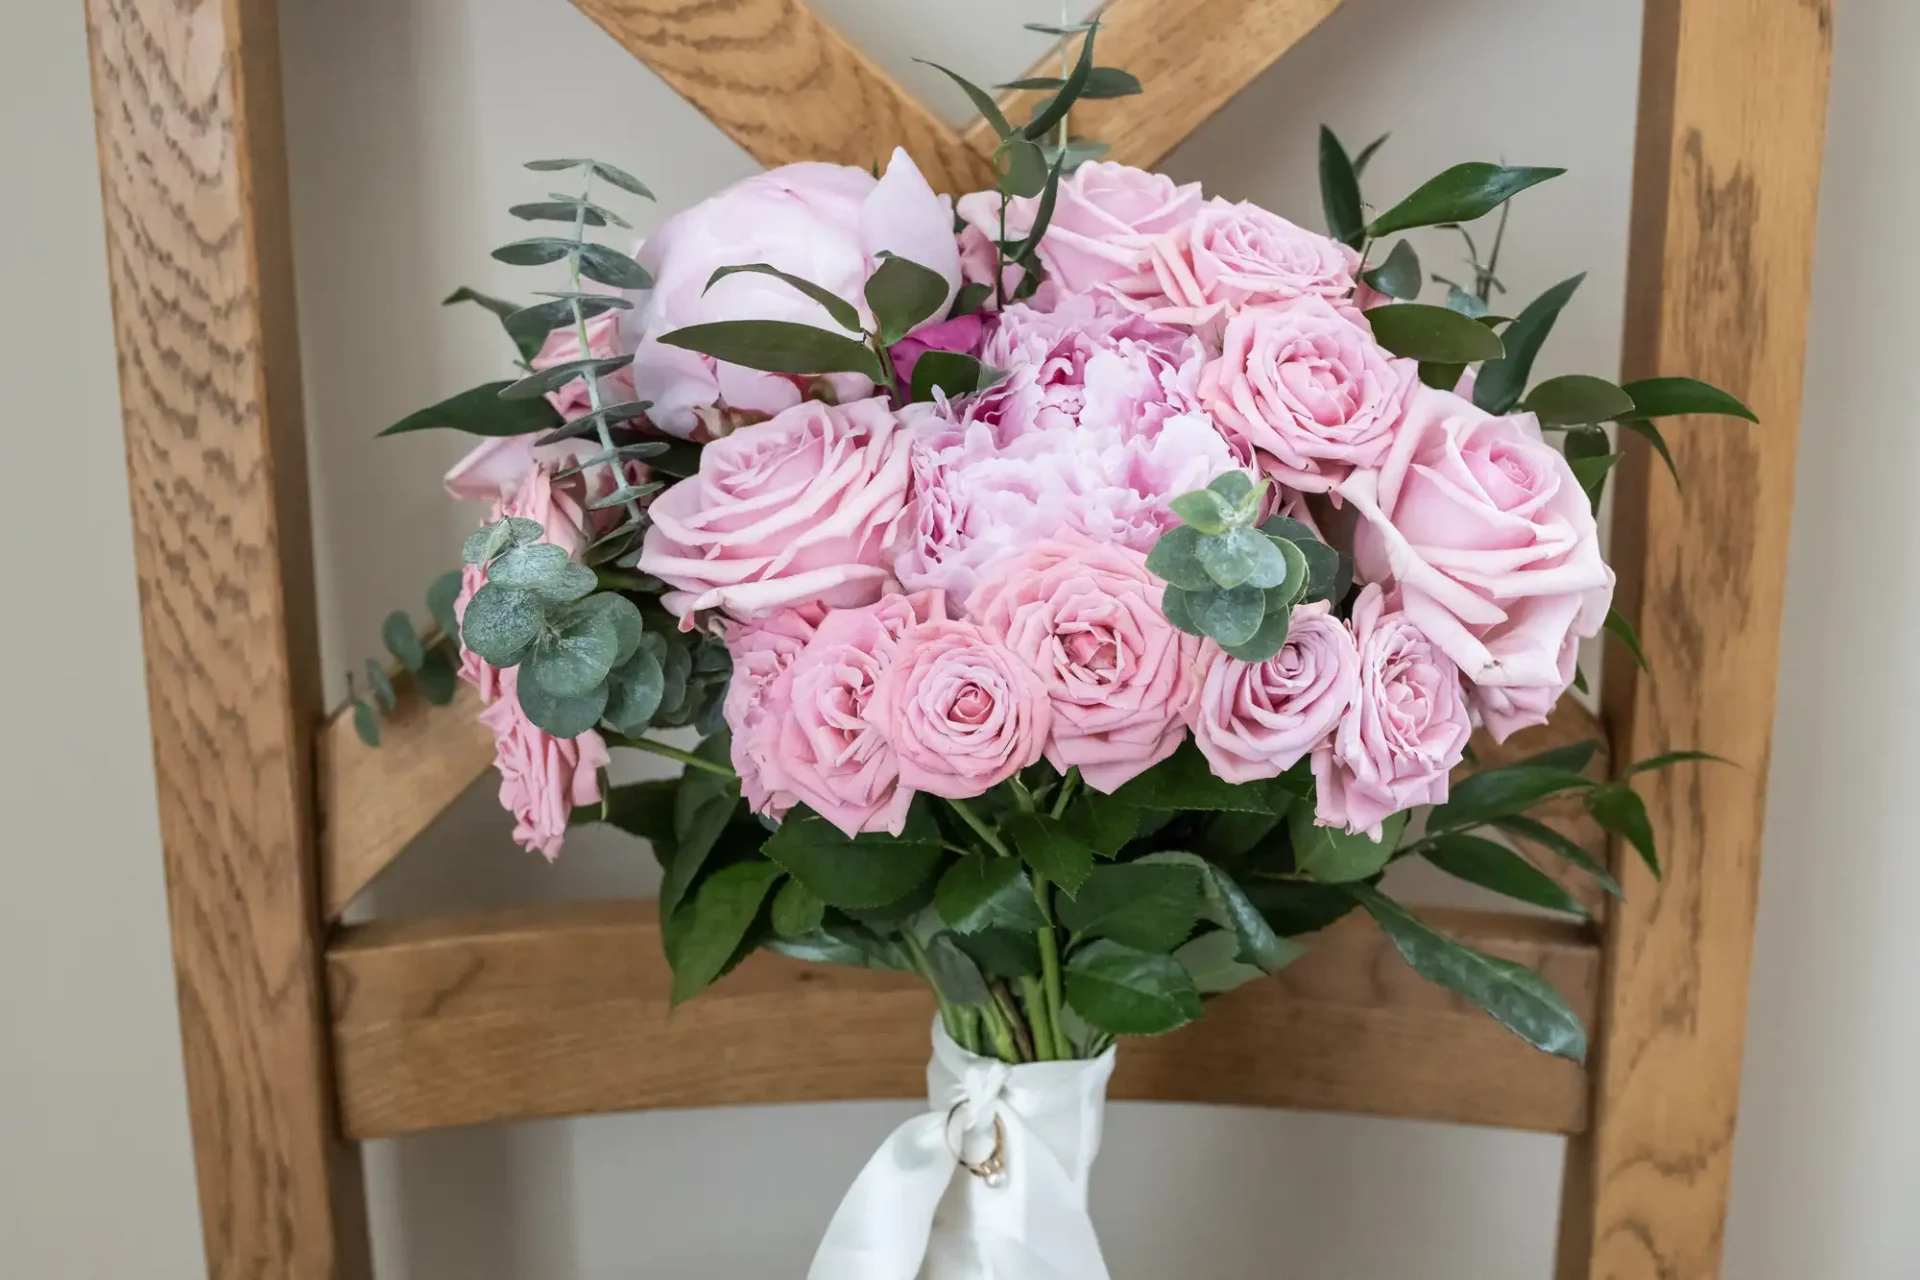 A bouquet of pink roses and greenery tied with a white ribbon, resting on a wooden chair.